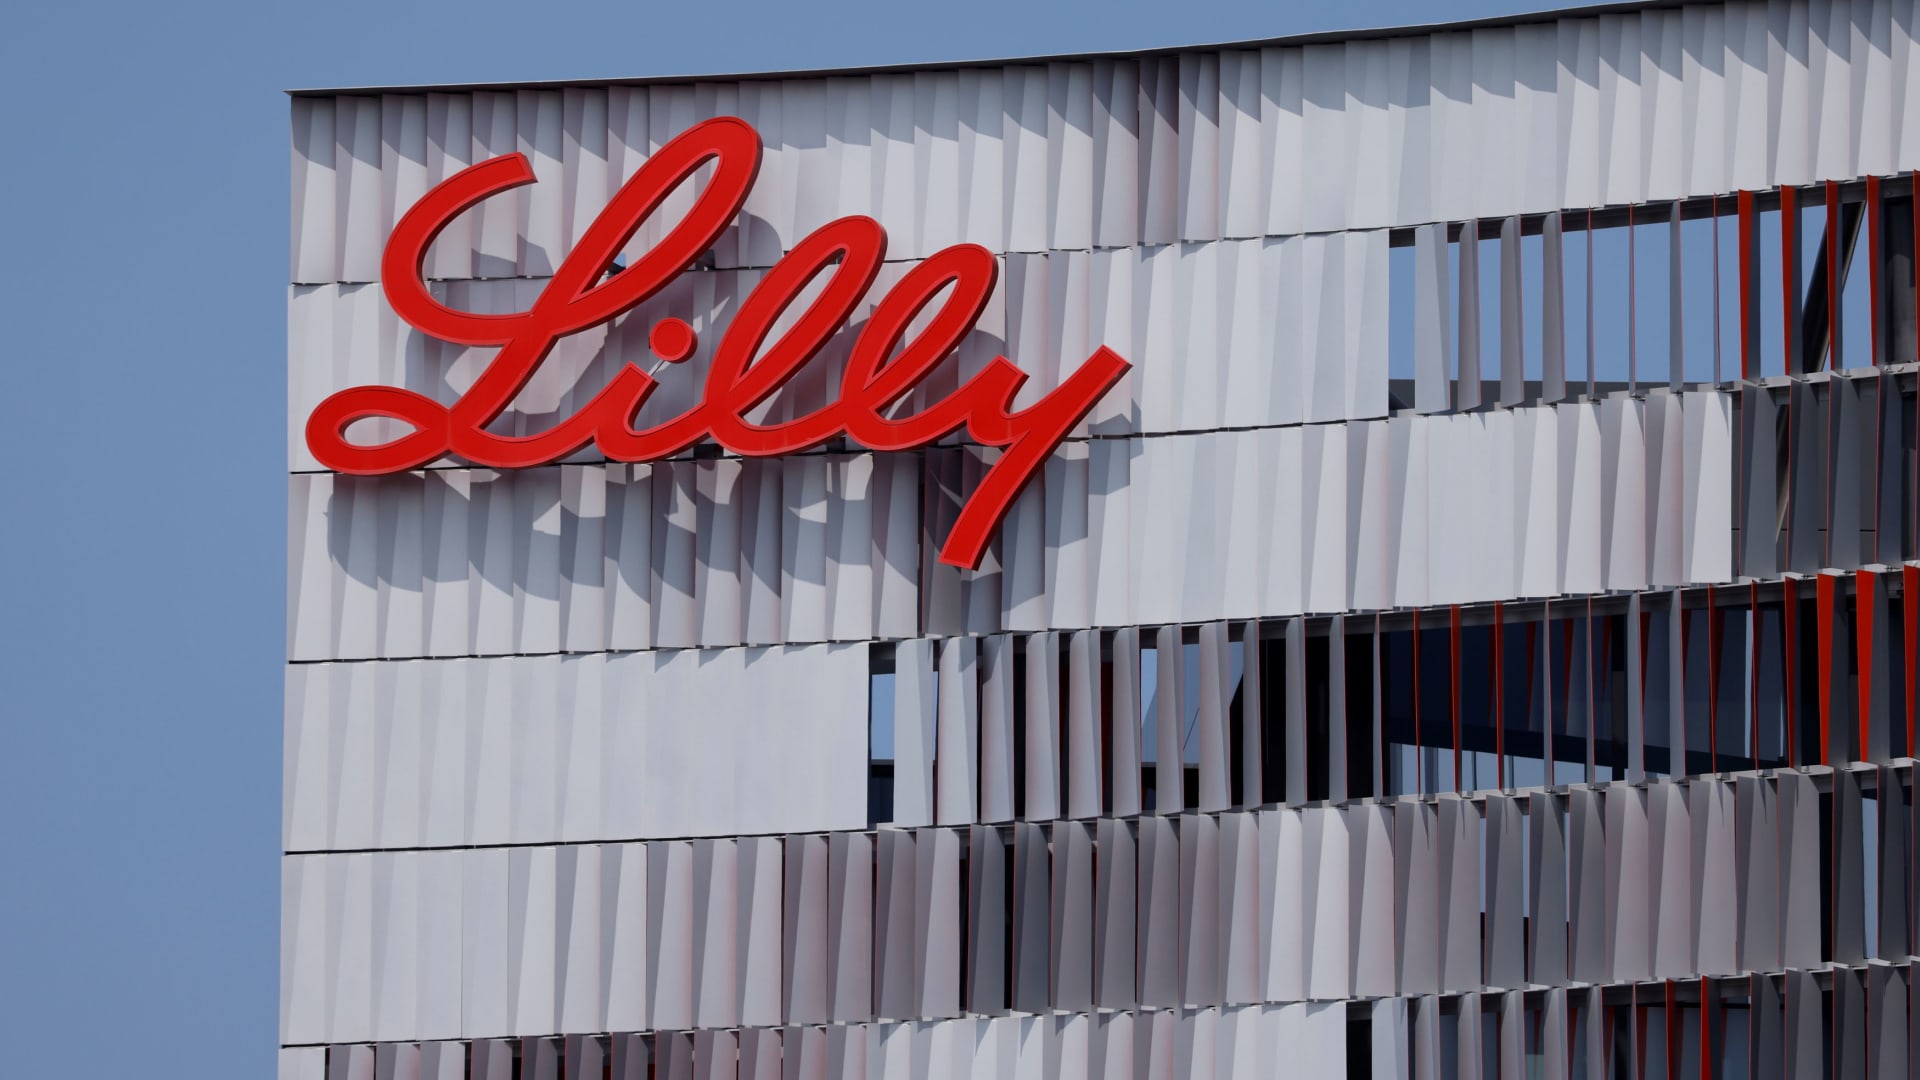 Eli Lilly’s ‘game-changing’ diabetes drug could boost the stock, SVB Securities says